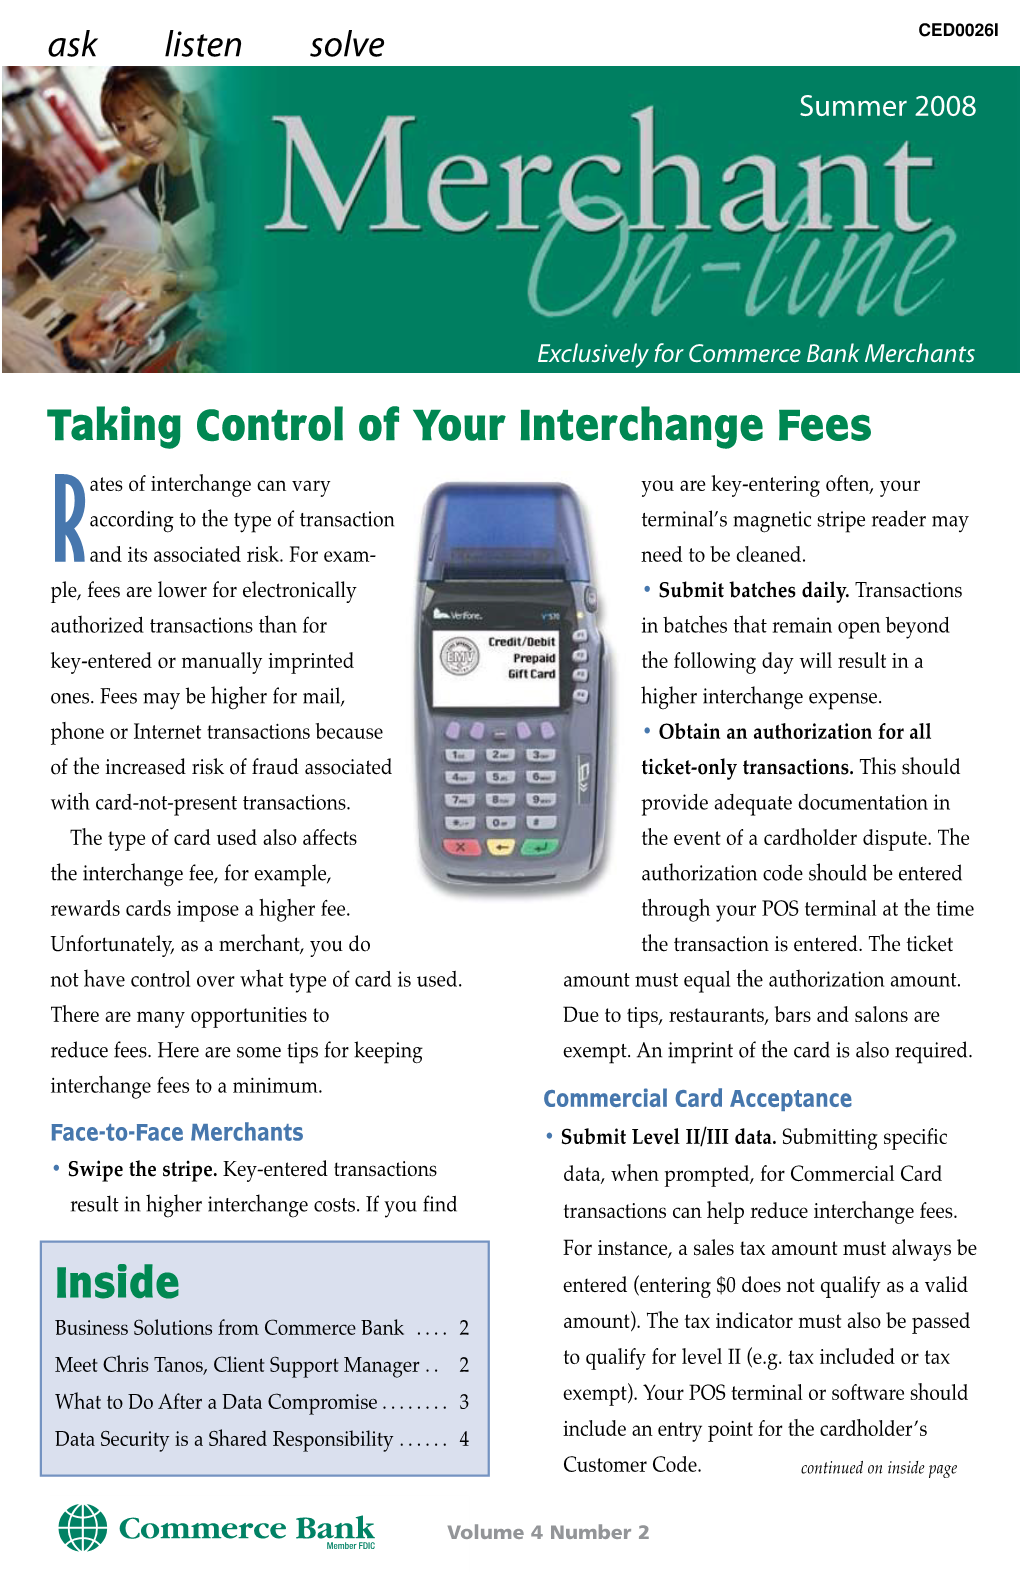 Inside Taking Control of Your Interchange Fees